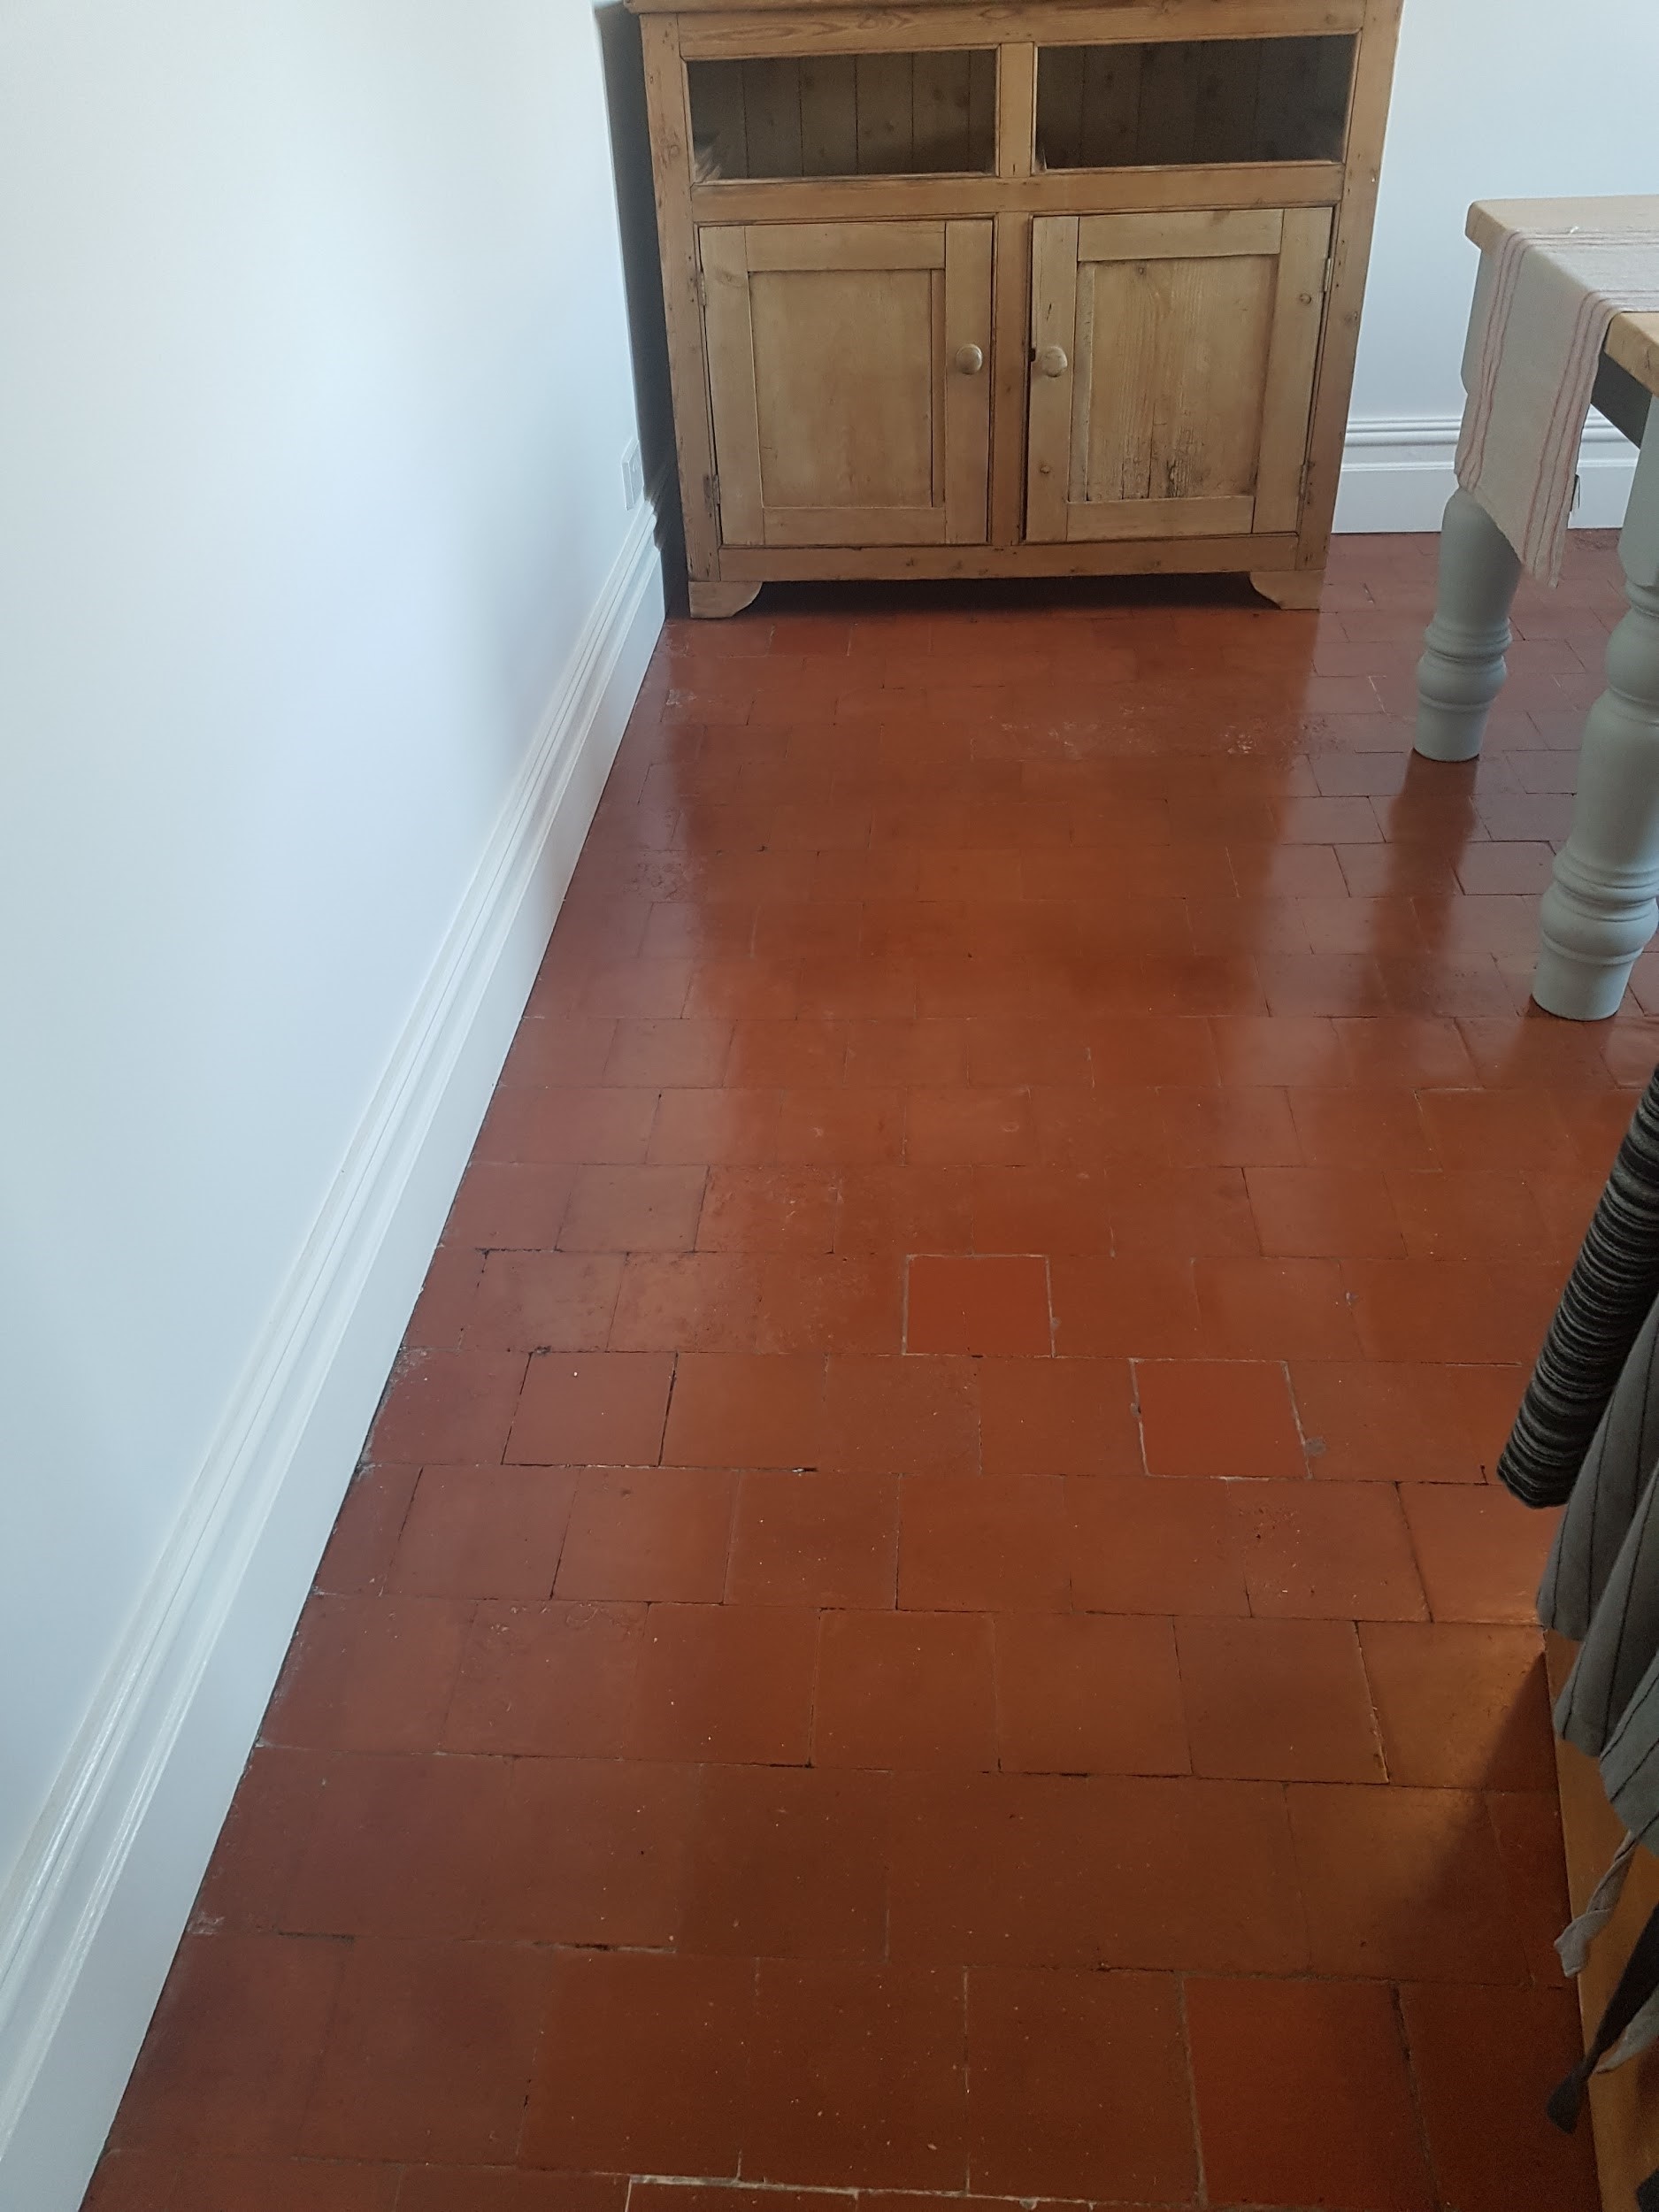 Quarry Tiled Kitchen Floor After Cleaning Goostrey